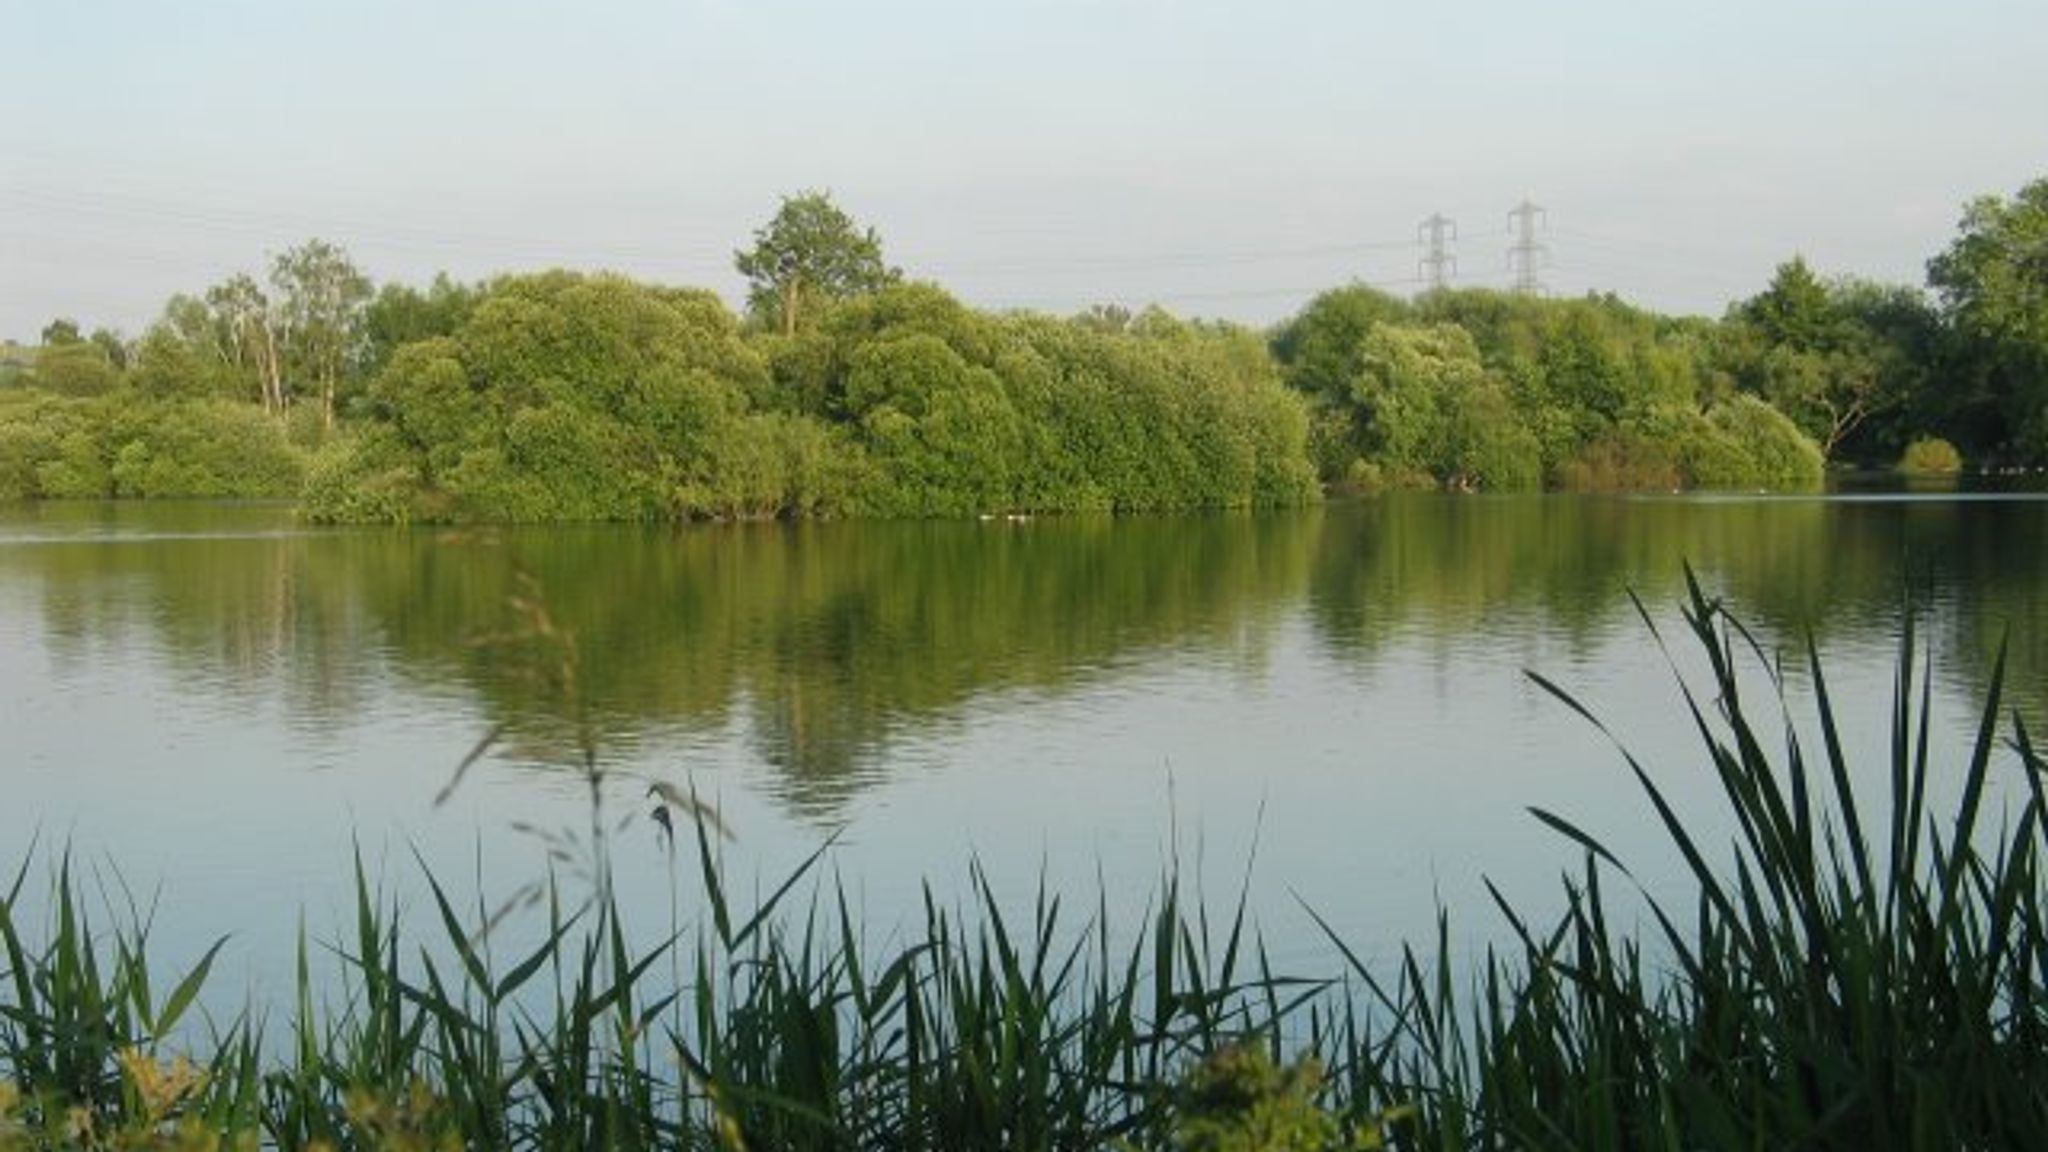 Young Boy dies after getting into difficulty in Cheshunt lake near Enfield